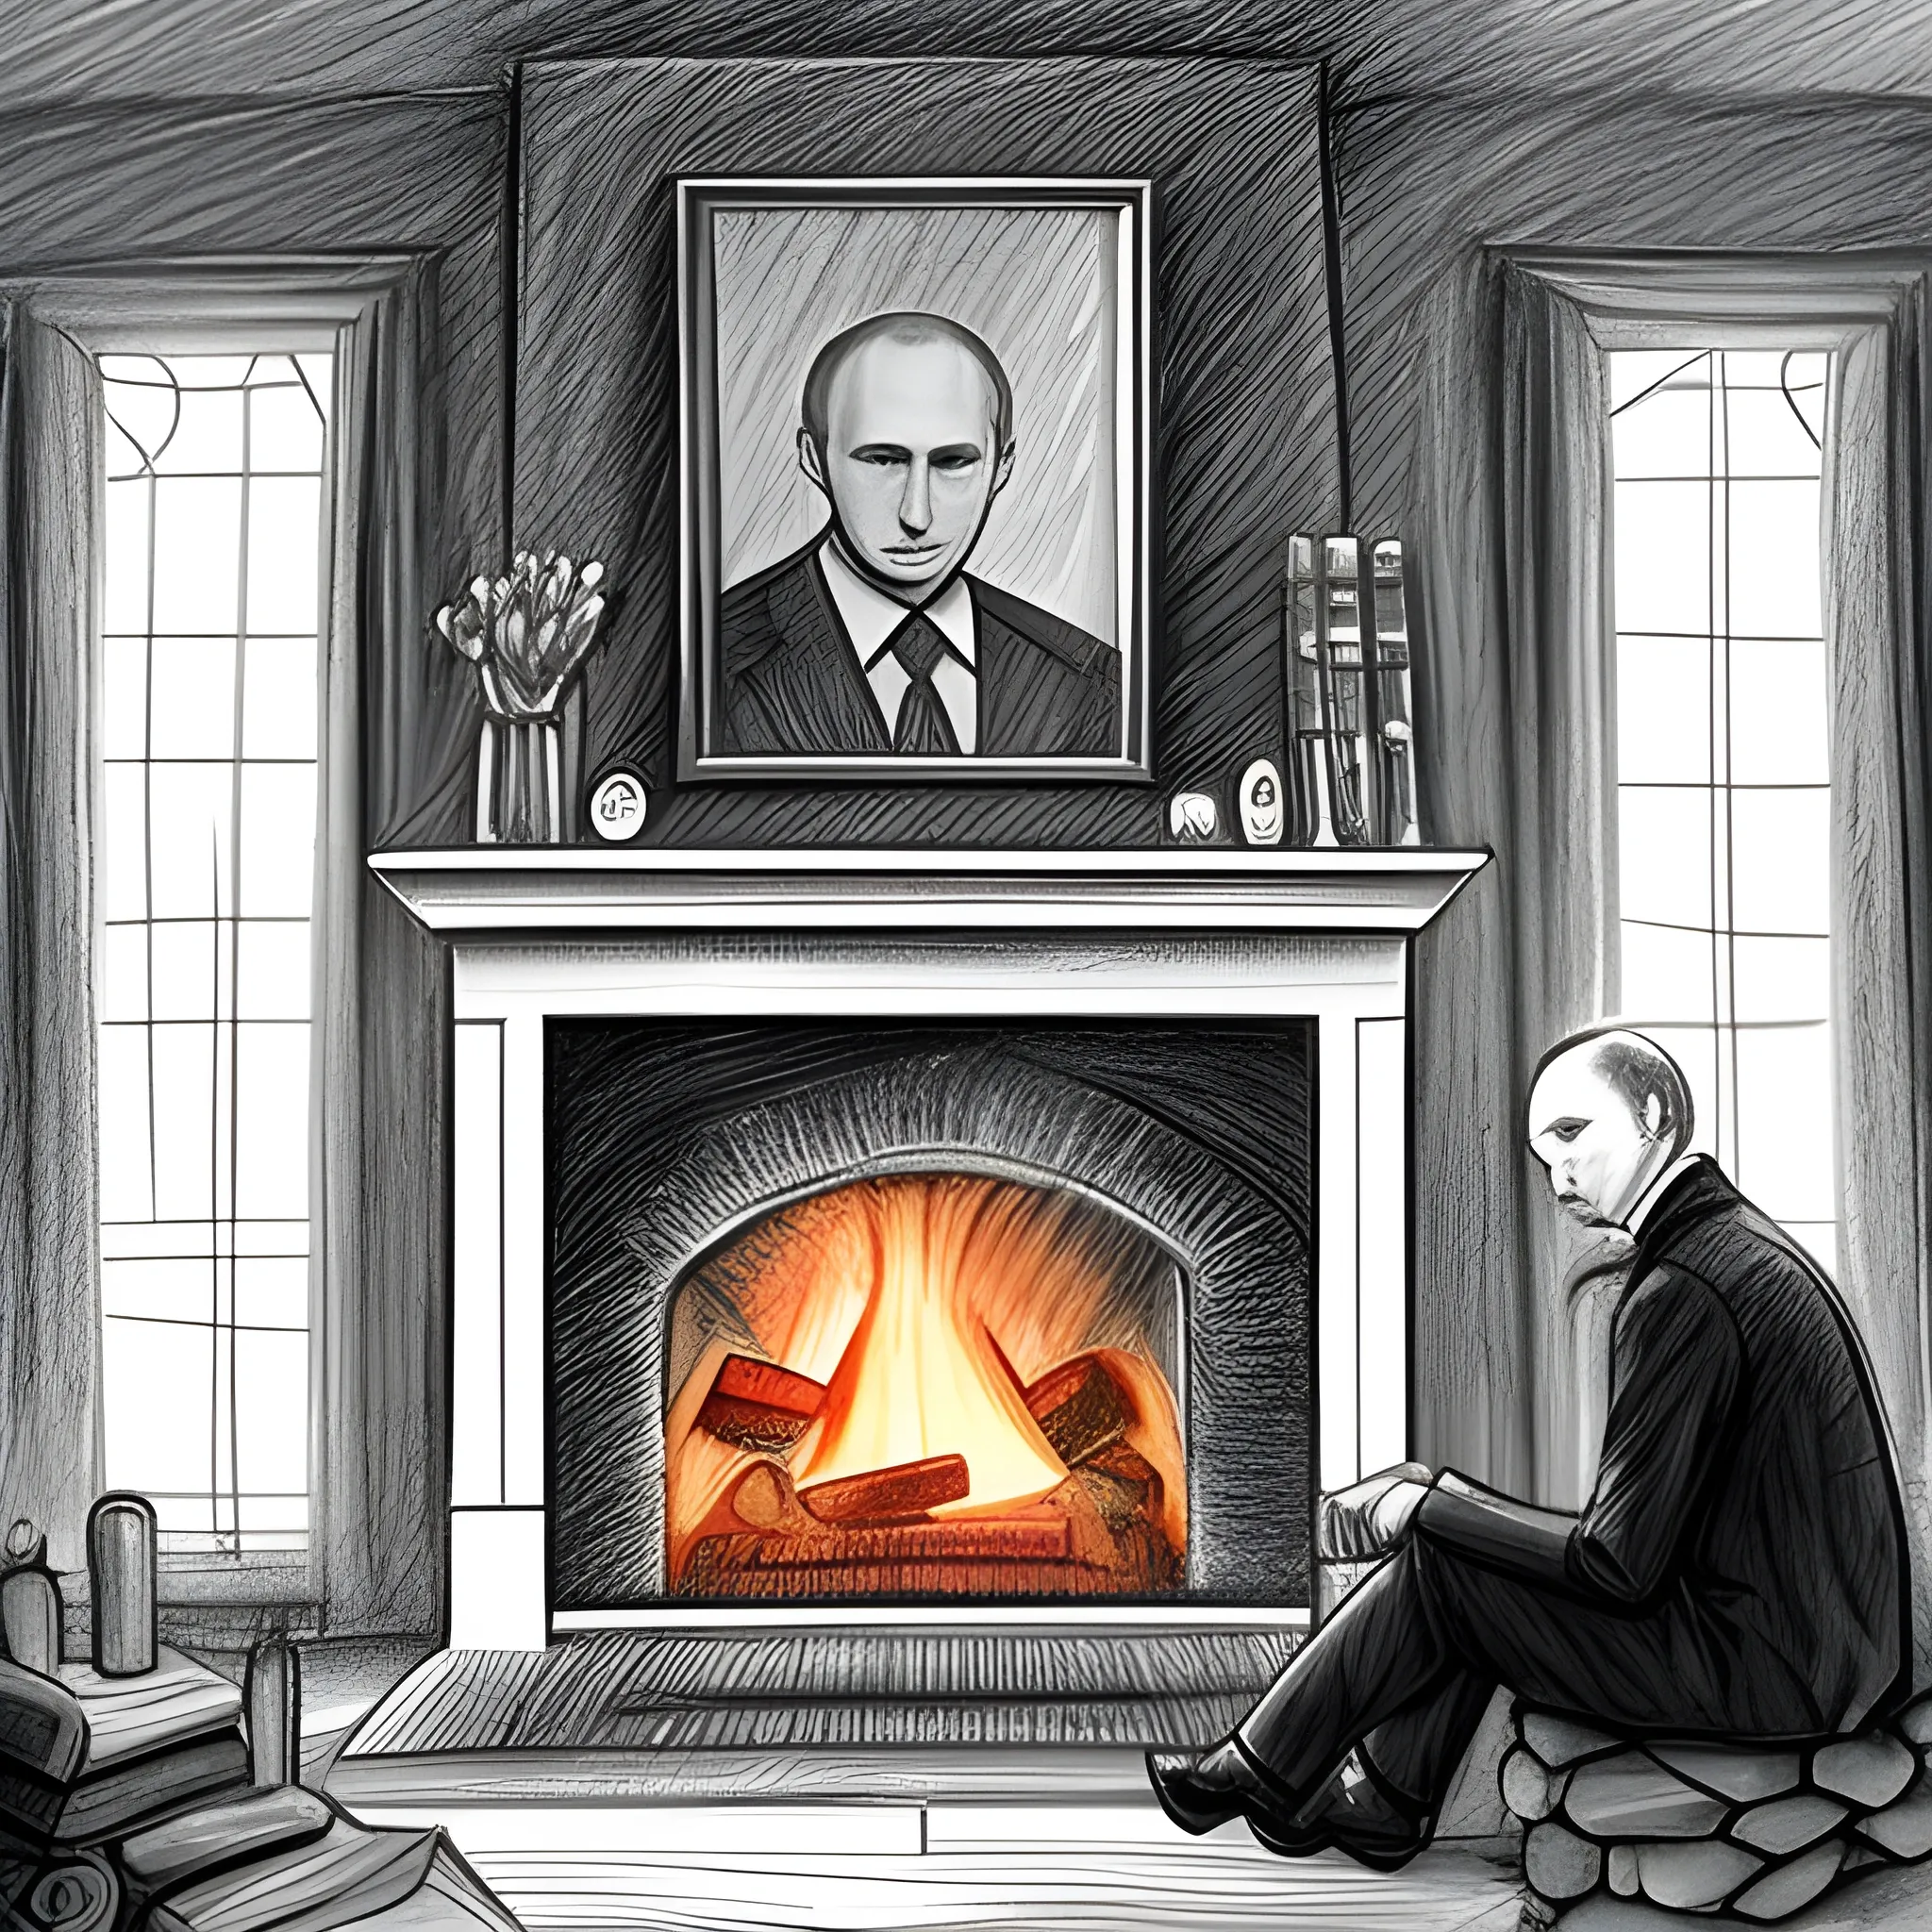 , Pencil Sketch putin by the fire place as people look thrue window
